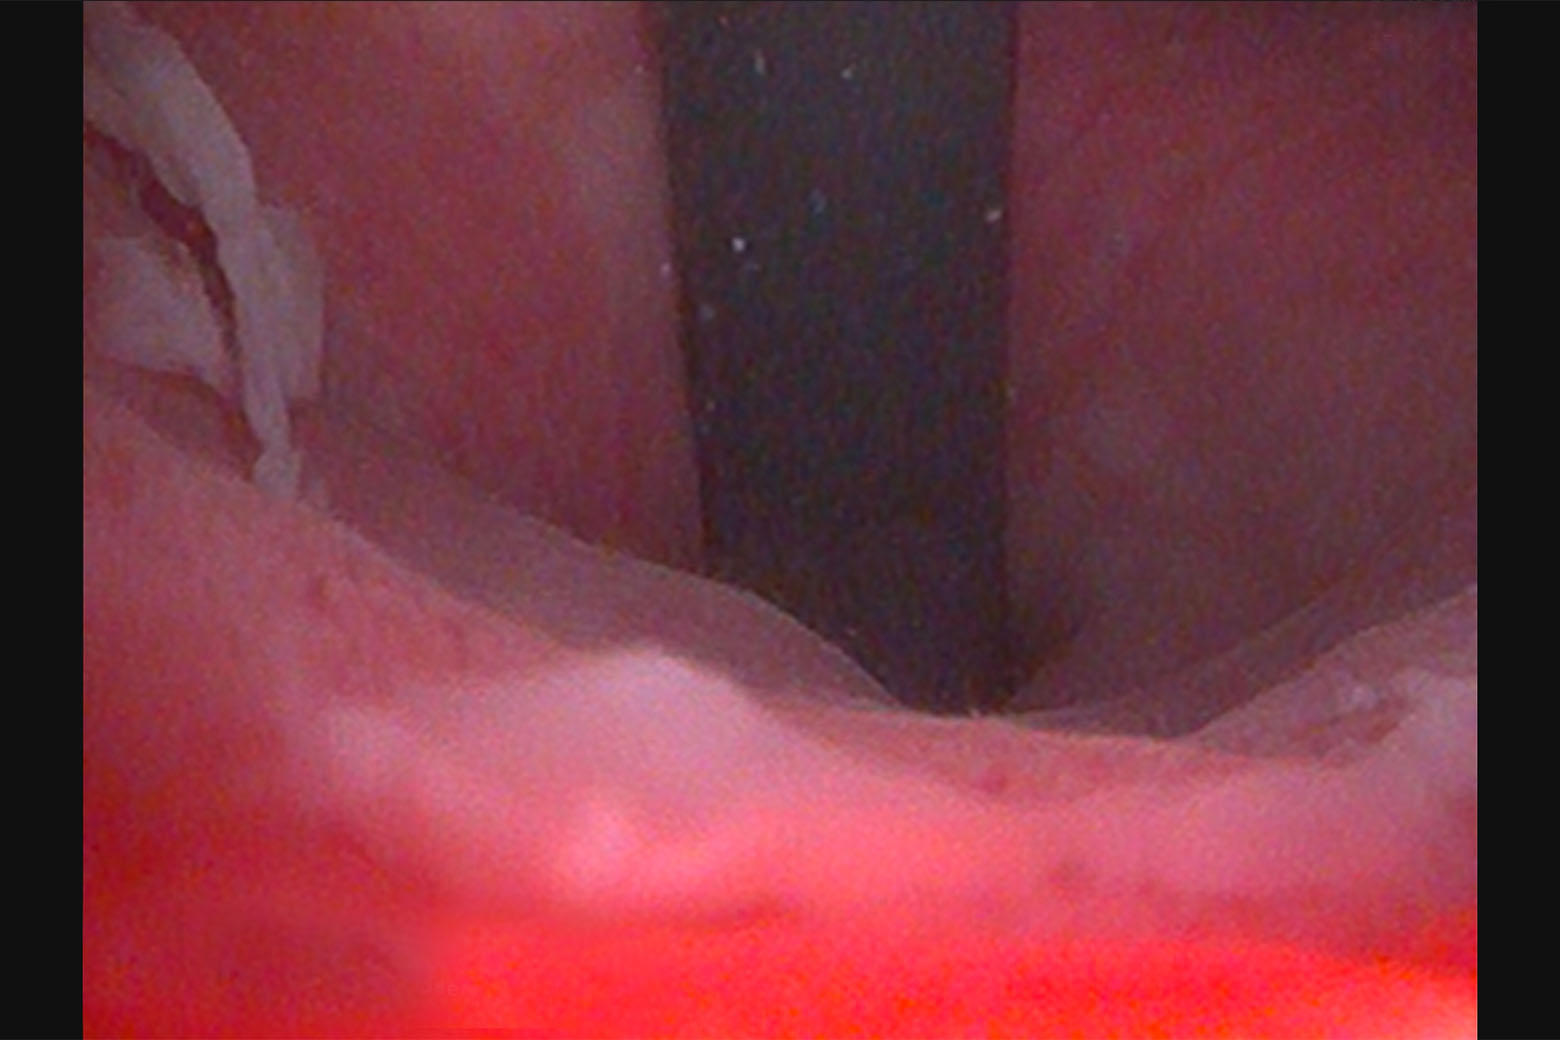 Image From Cystoscopy Revealing Diffuse Erythema, Inflammation And Carcinoma In Situ